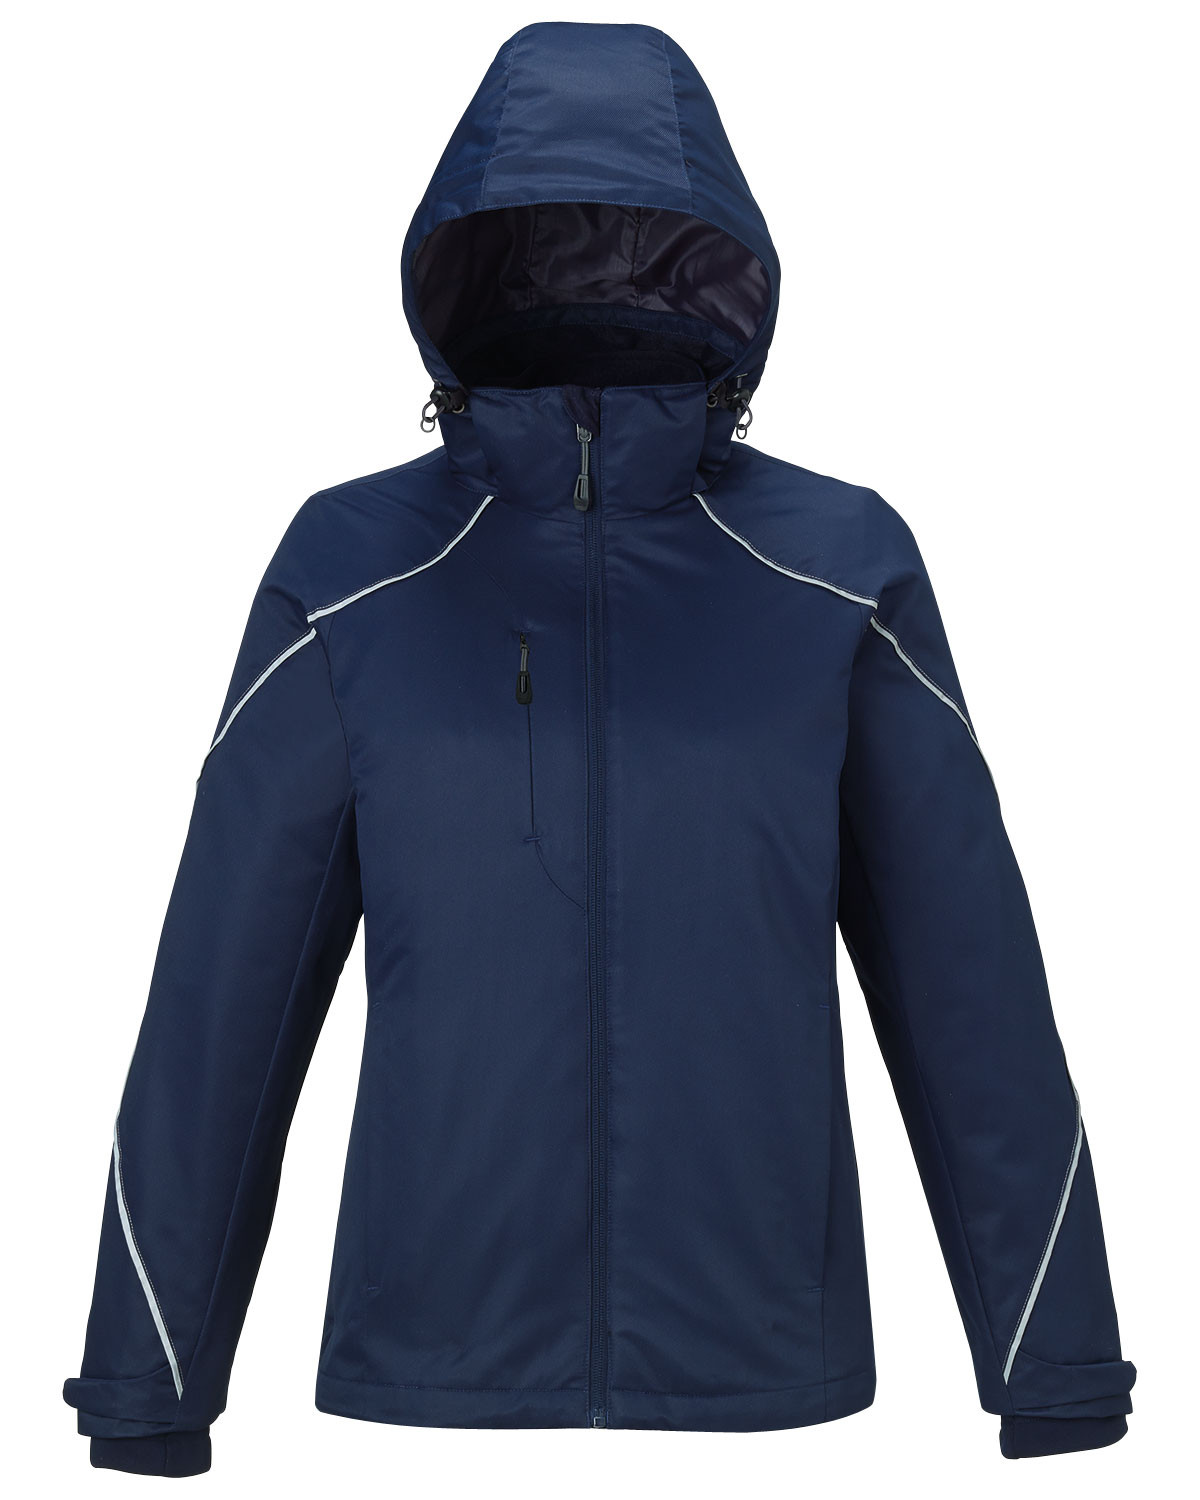 North End 78196 - Ladies' Angle 3-in-1 Jacket with Bonded Fleece Liner